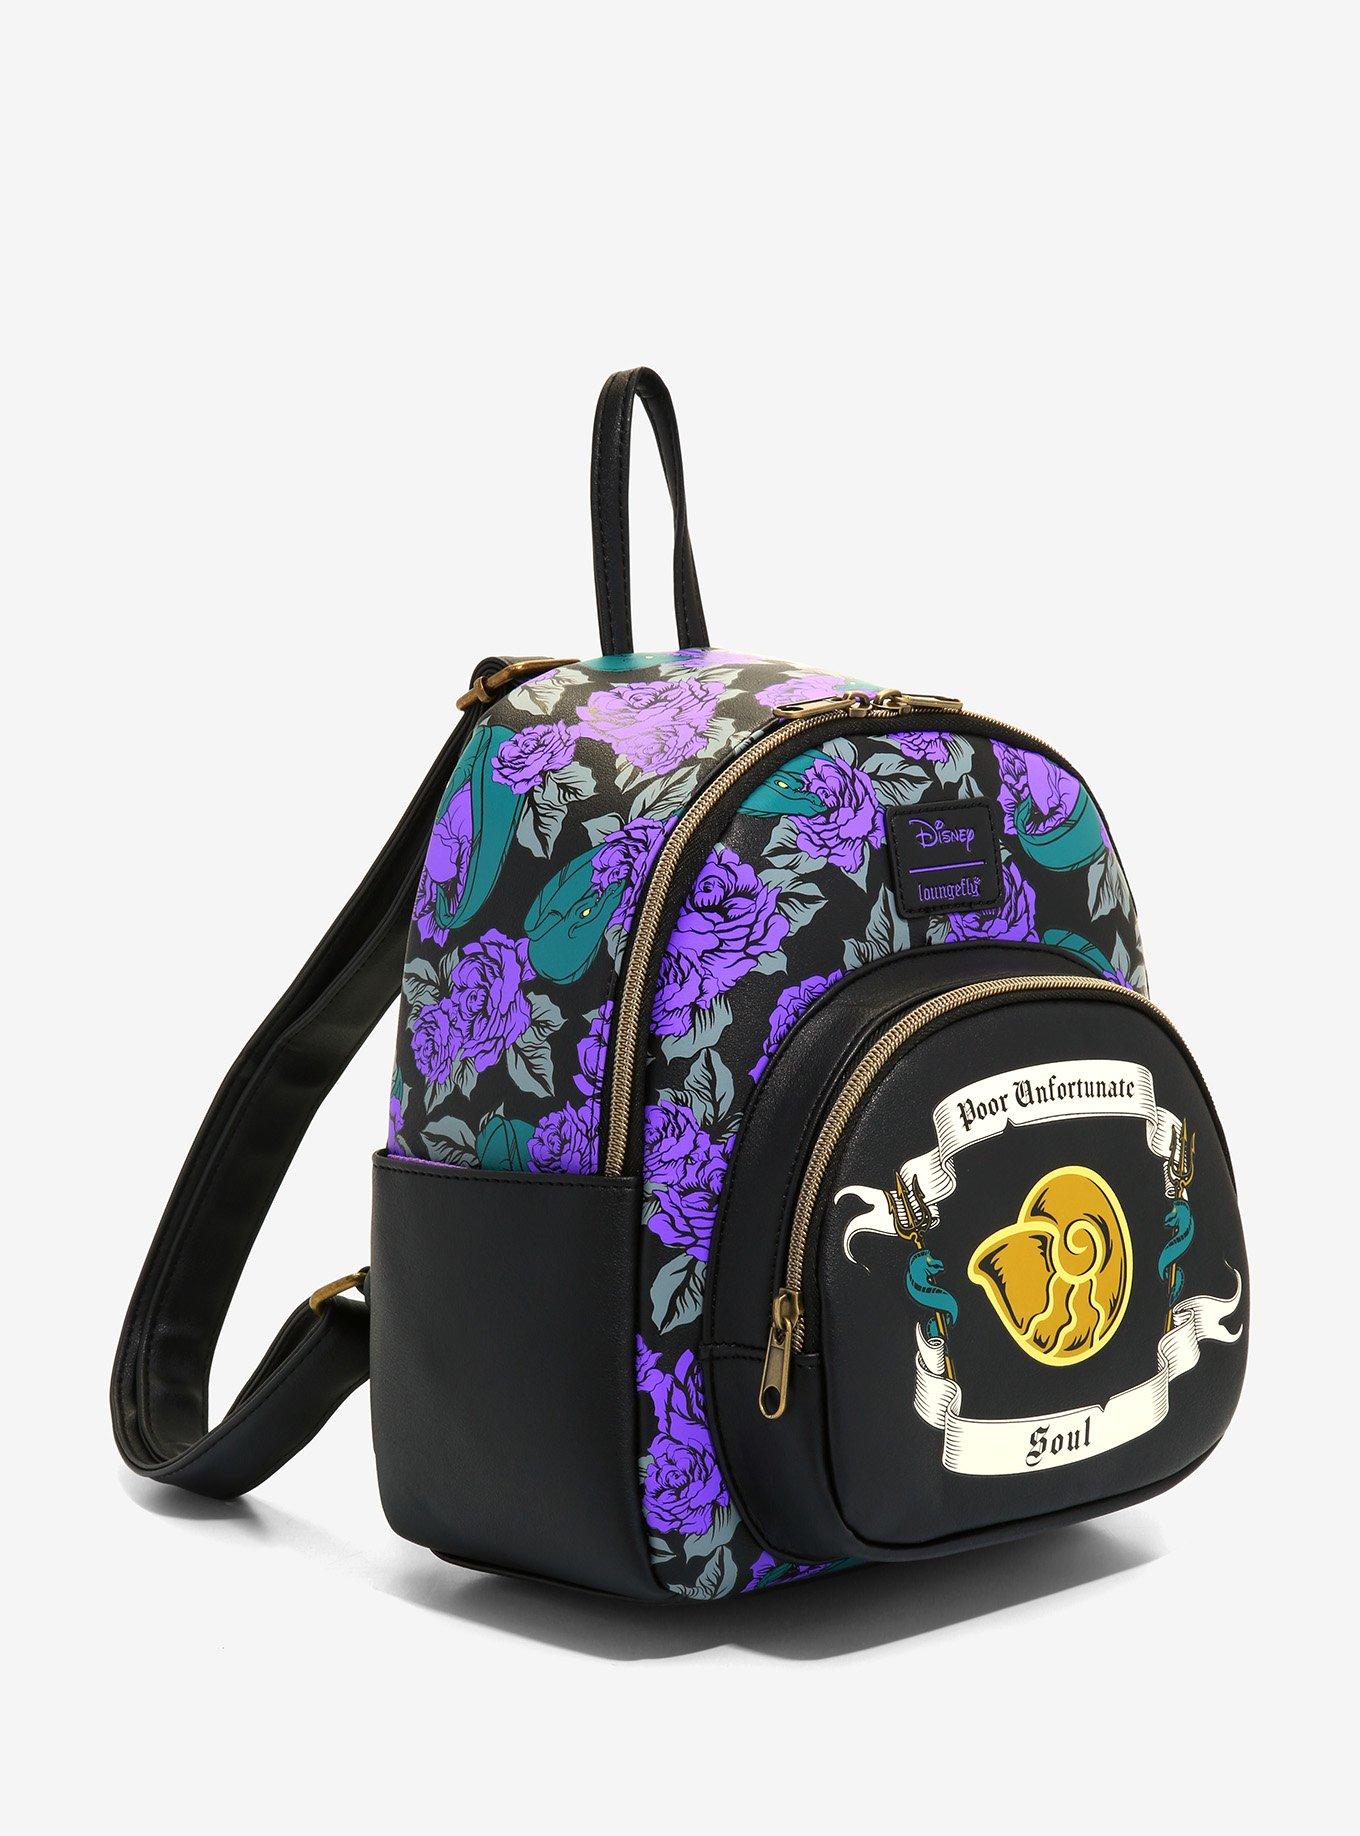  Loungefly The Little Mermaid Ursula Lair Glow Double Strap  Shoulder Bag : Clothing, Shoes & Jewelry